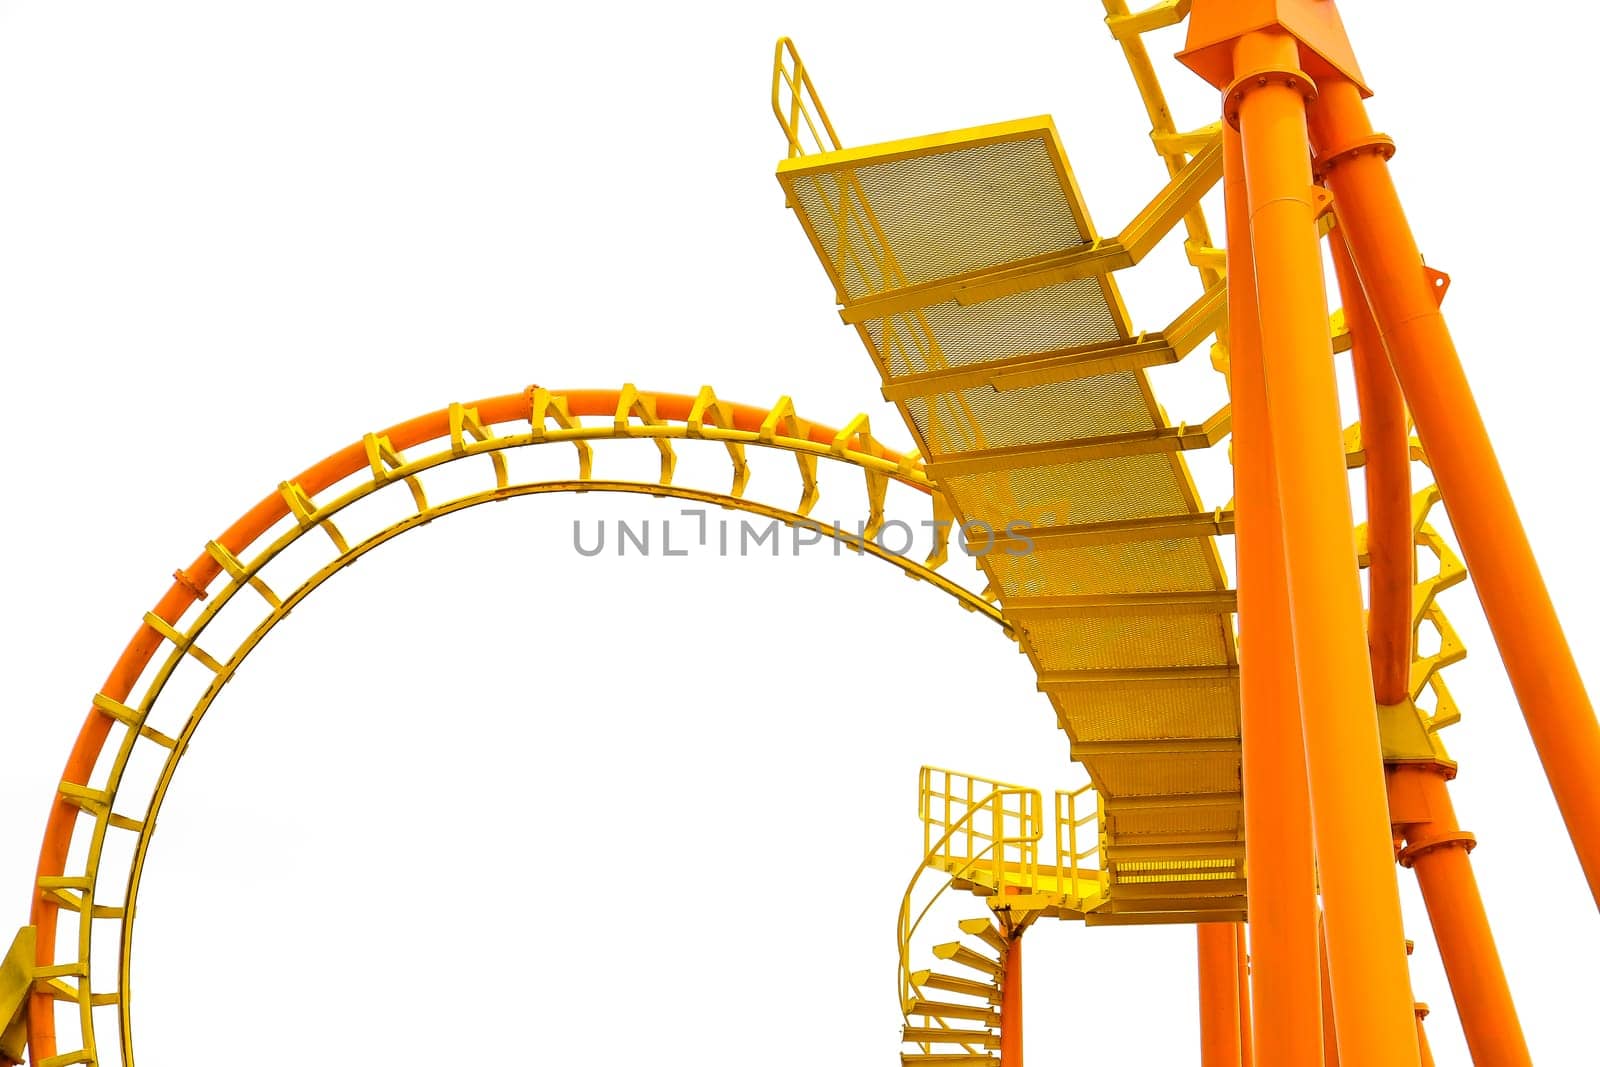 Rollercoaster on white background by ponsulak